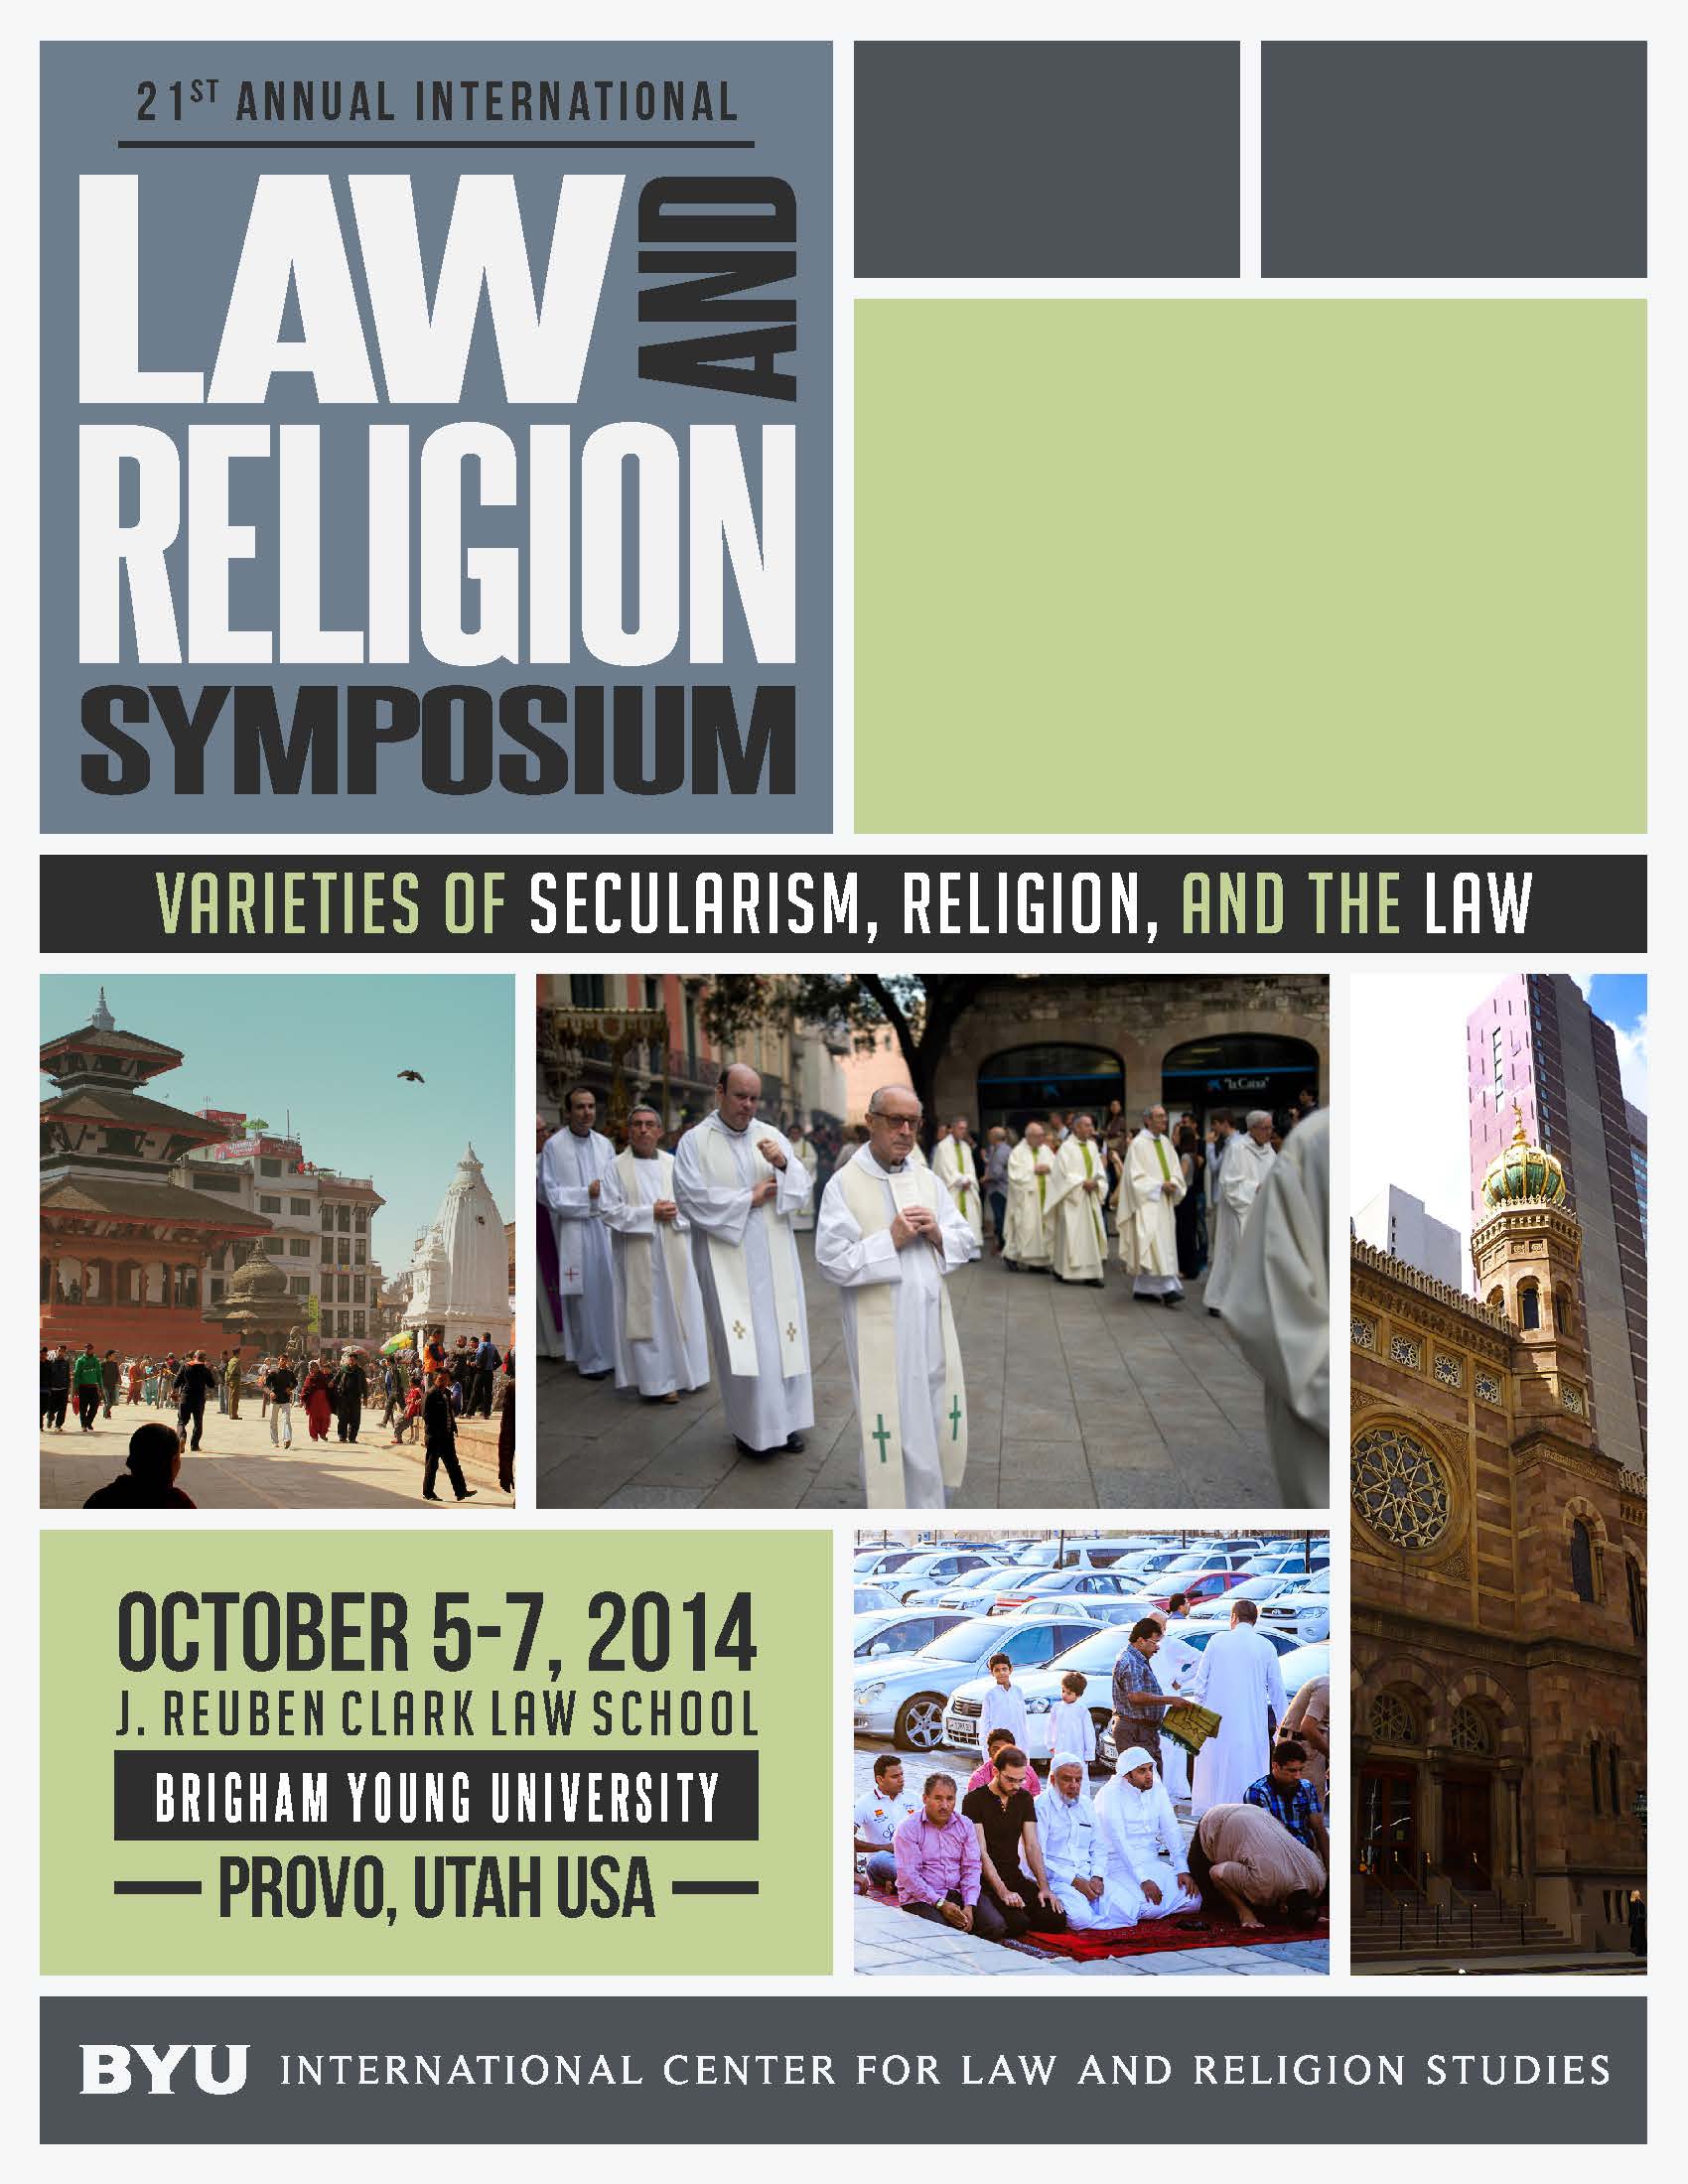 Image for Symposium 2014: 'Varieties of Secularism, Religion, and the Law'